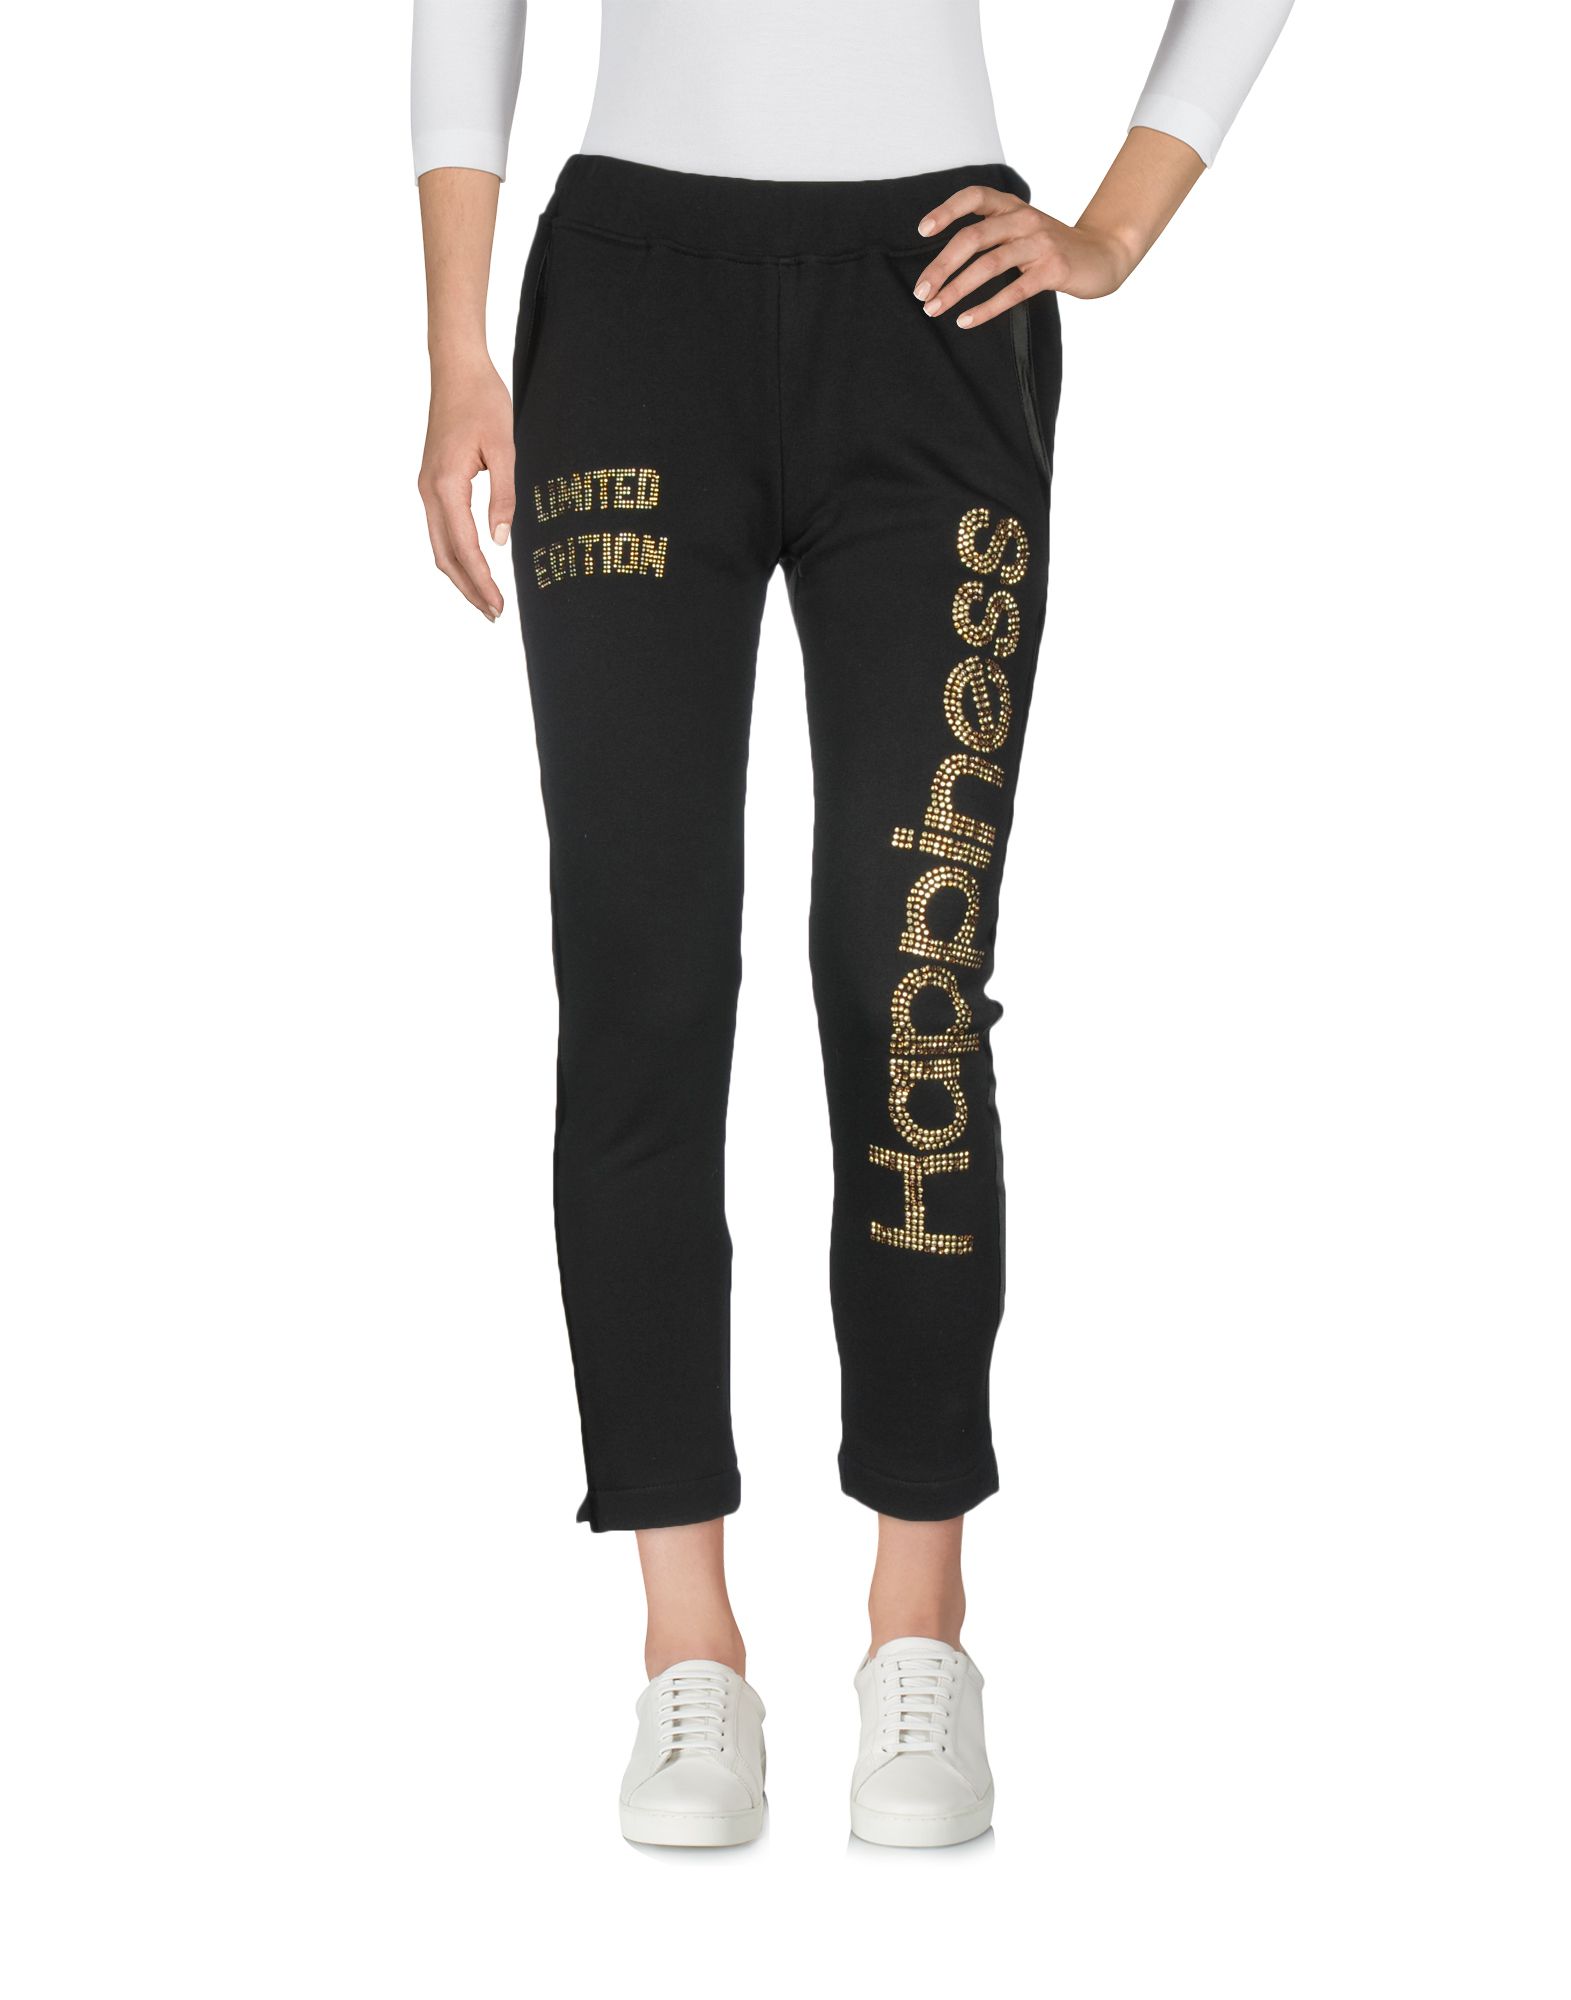 HAPPINESS Casual pants,13183296DX 3